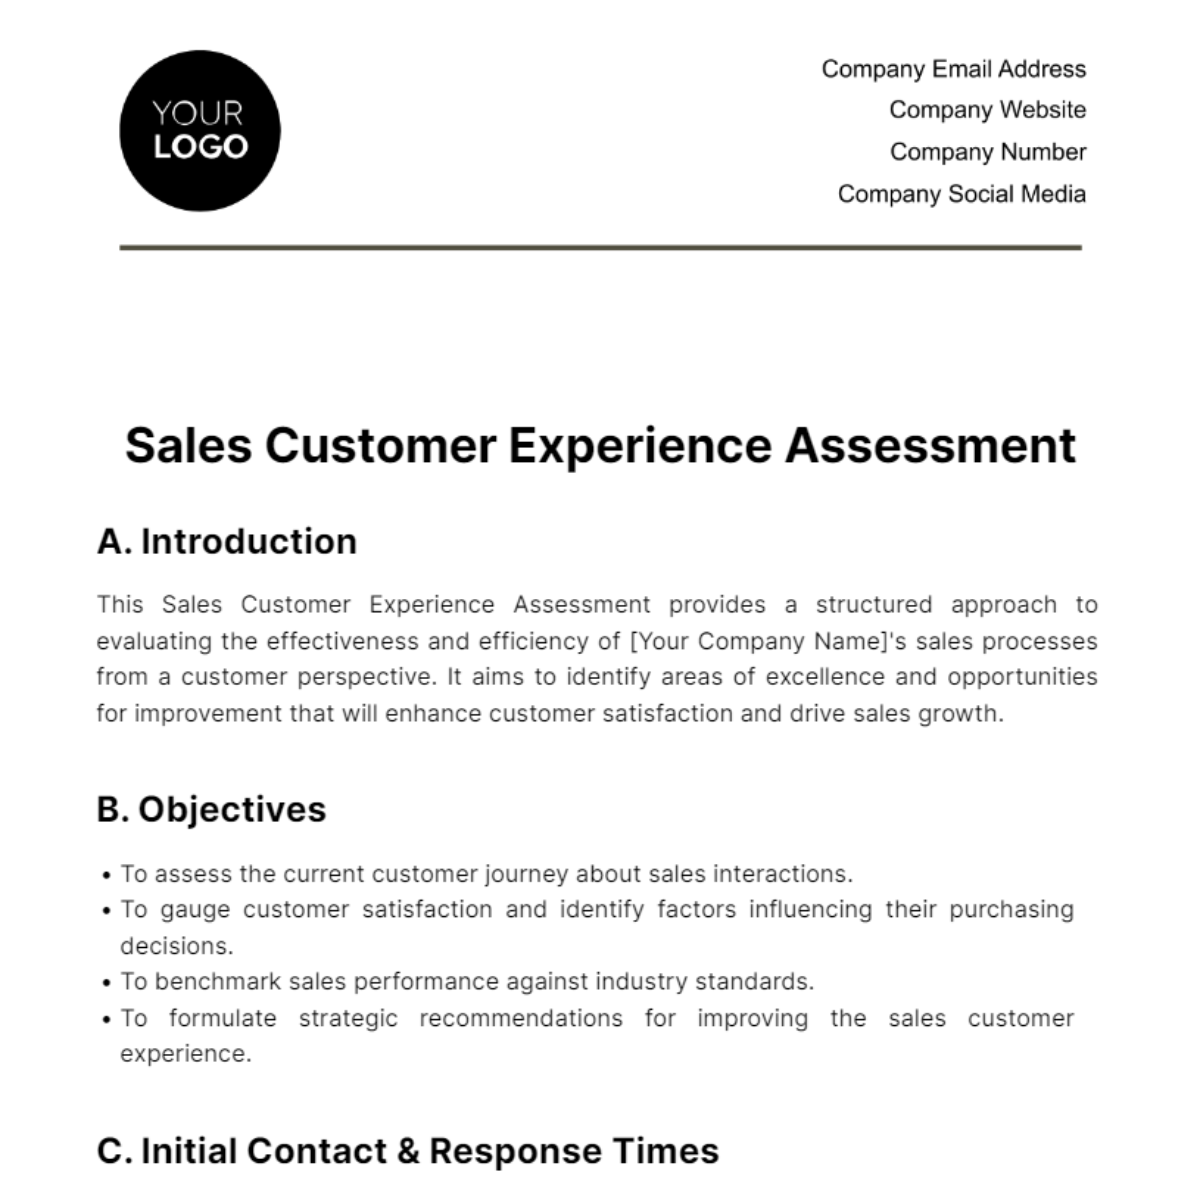 Sales Customer Experience Assessment Template